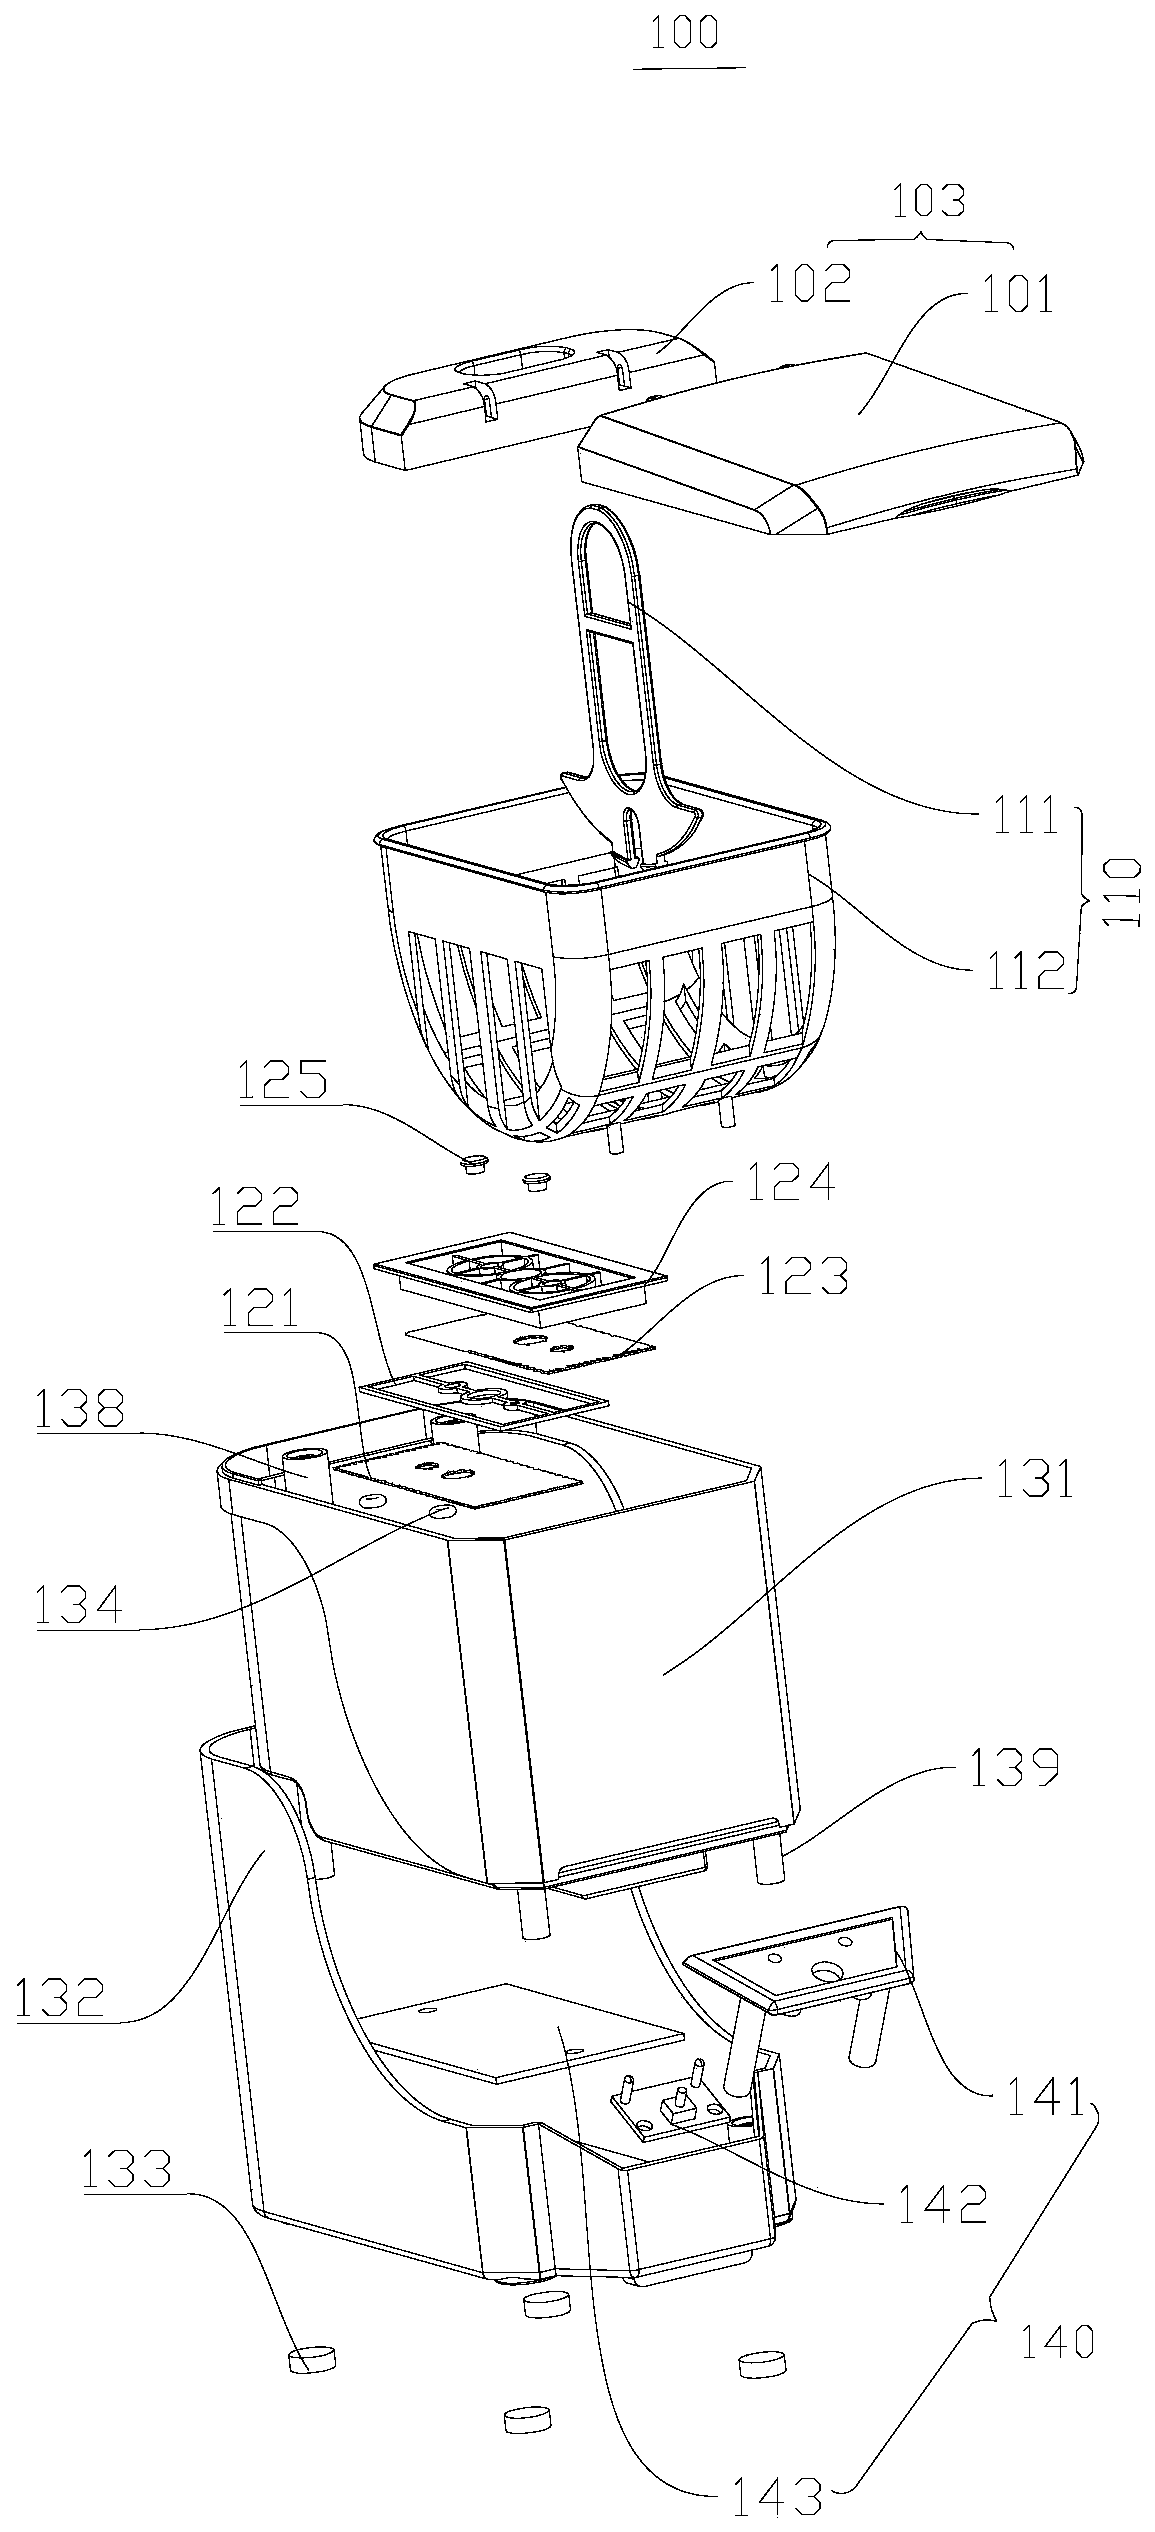 Denture cleaning machine and method for cleaning dentures